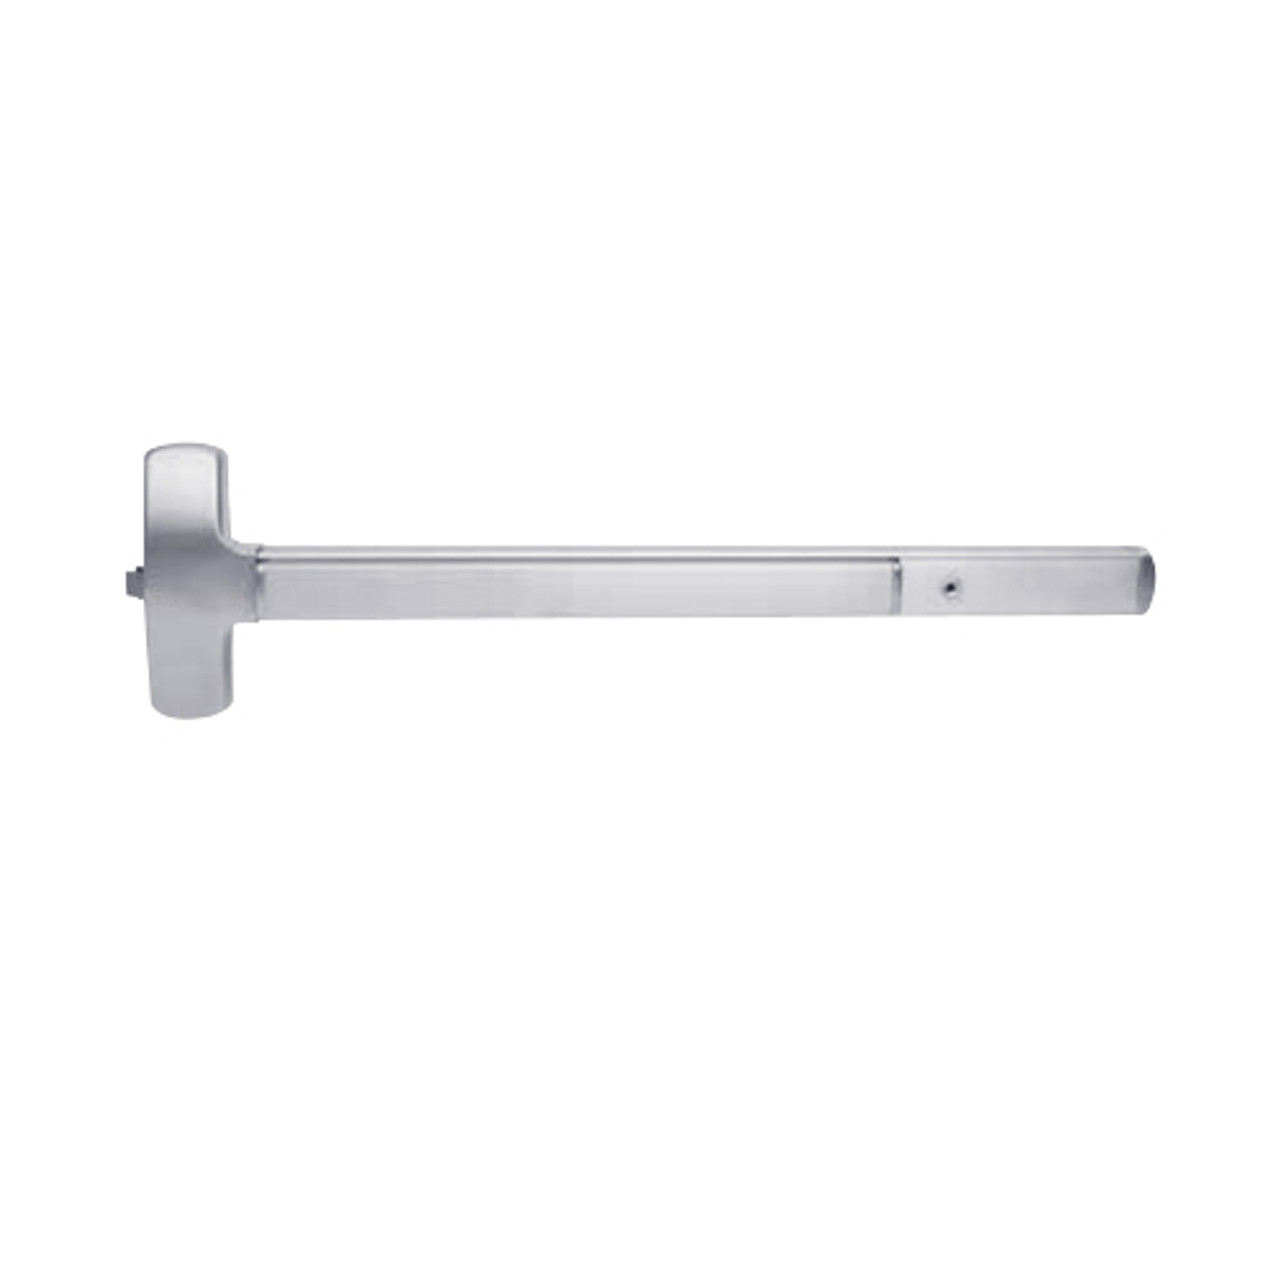 25-R-NL-OP-US32-3 Falcon Exit Device in Polished Stainless Steel